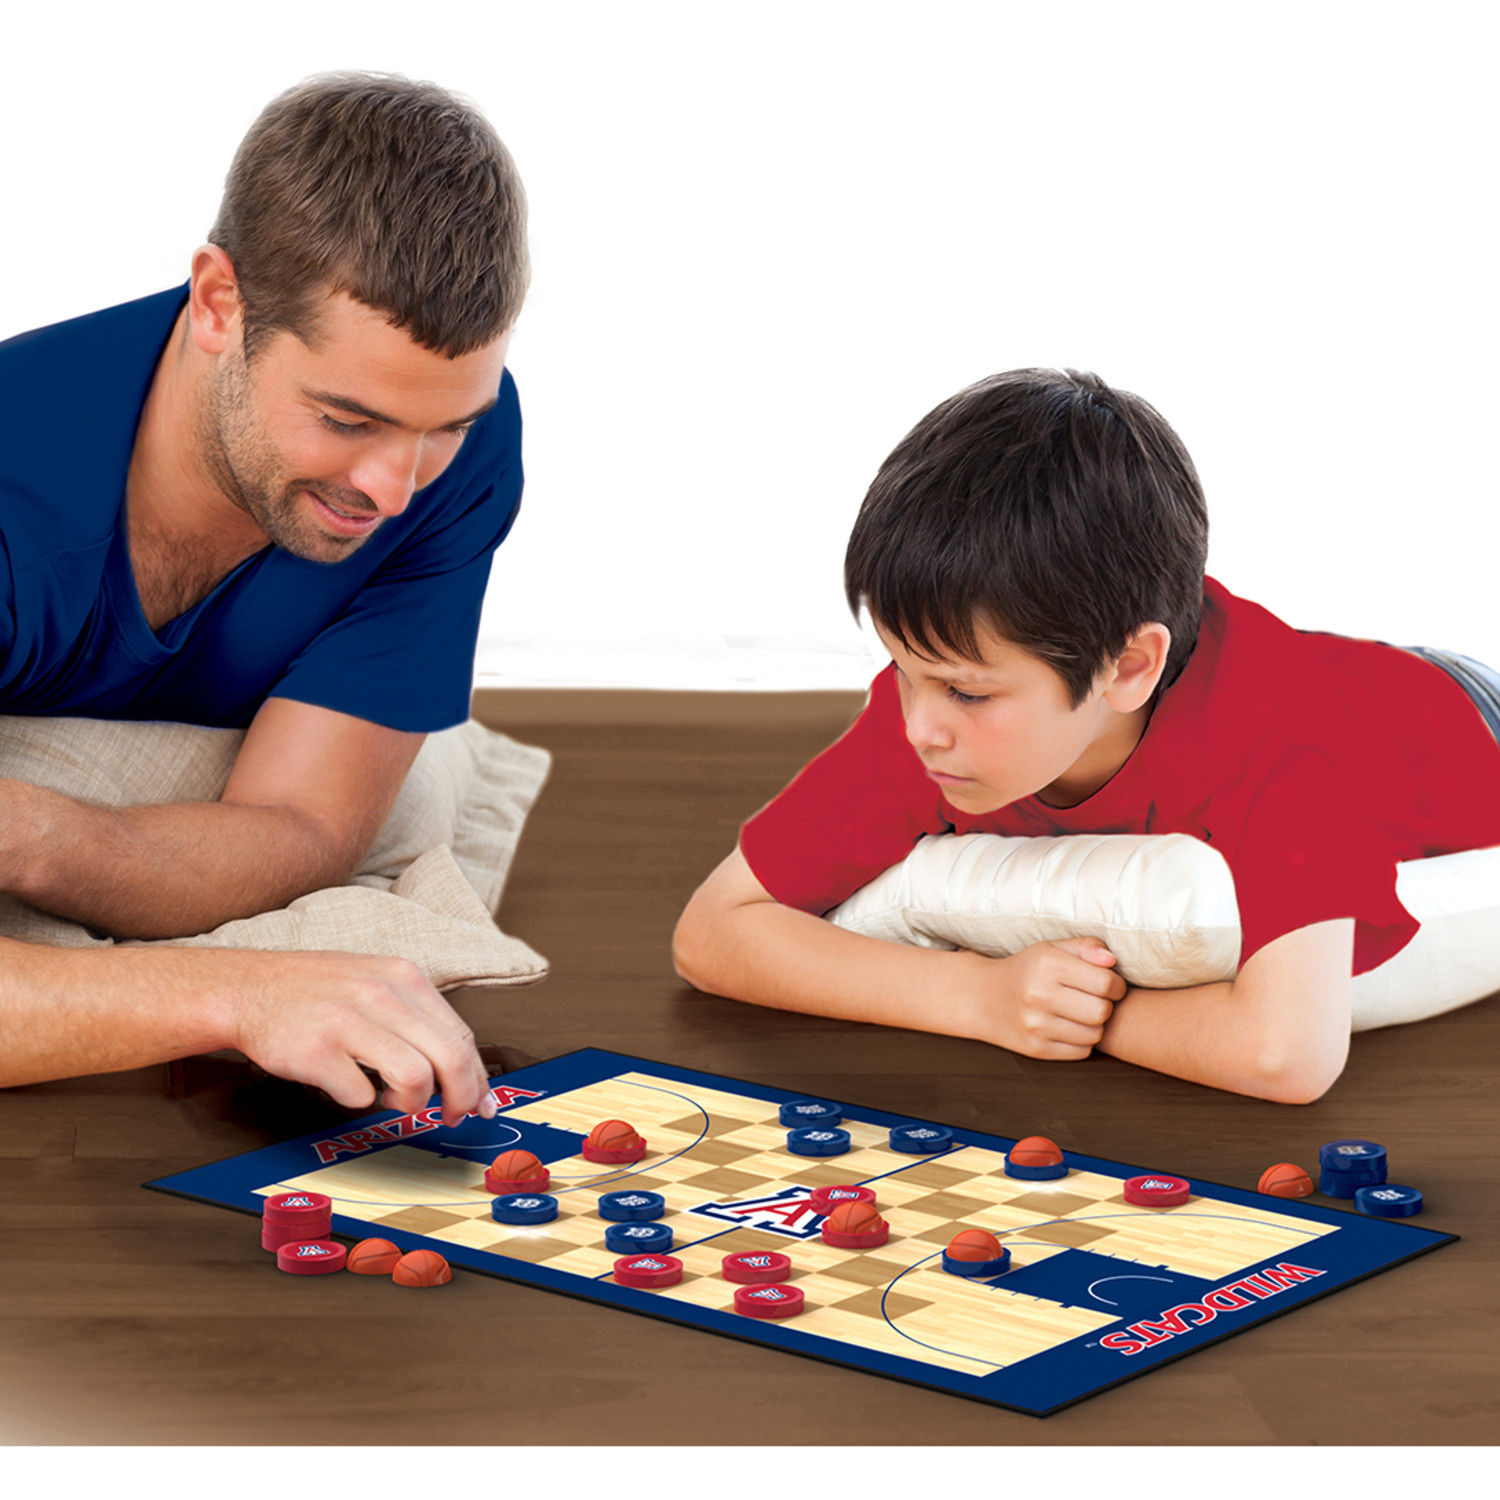 MasterPieces Officially licensed NCAA Arizona Wildcats Checkers Board Game for Families and Kids ages 6 and Up - image 5 of 5